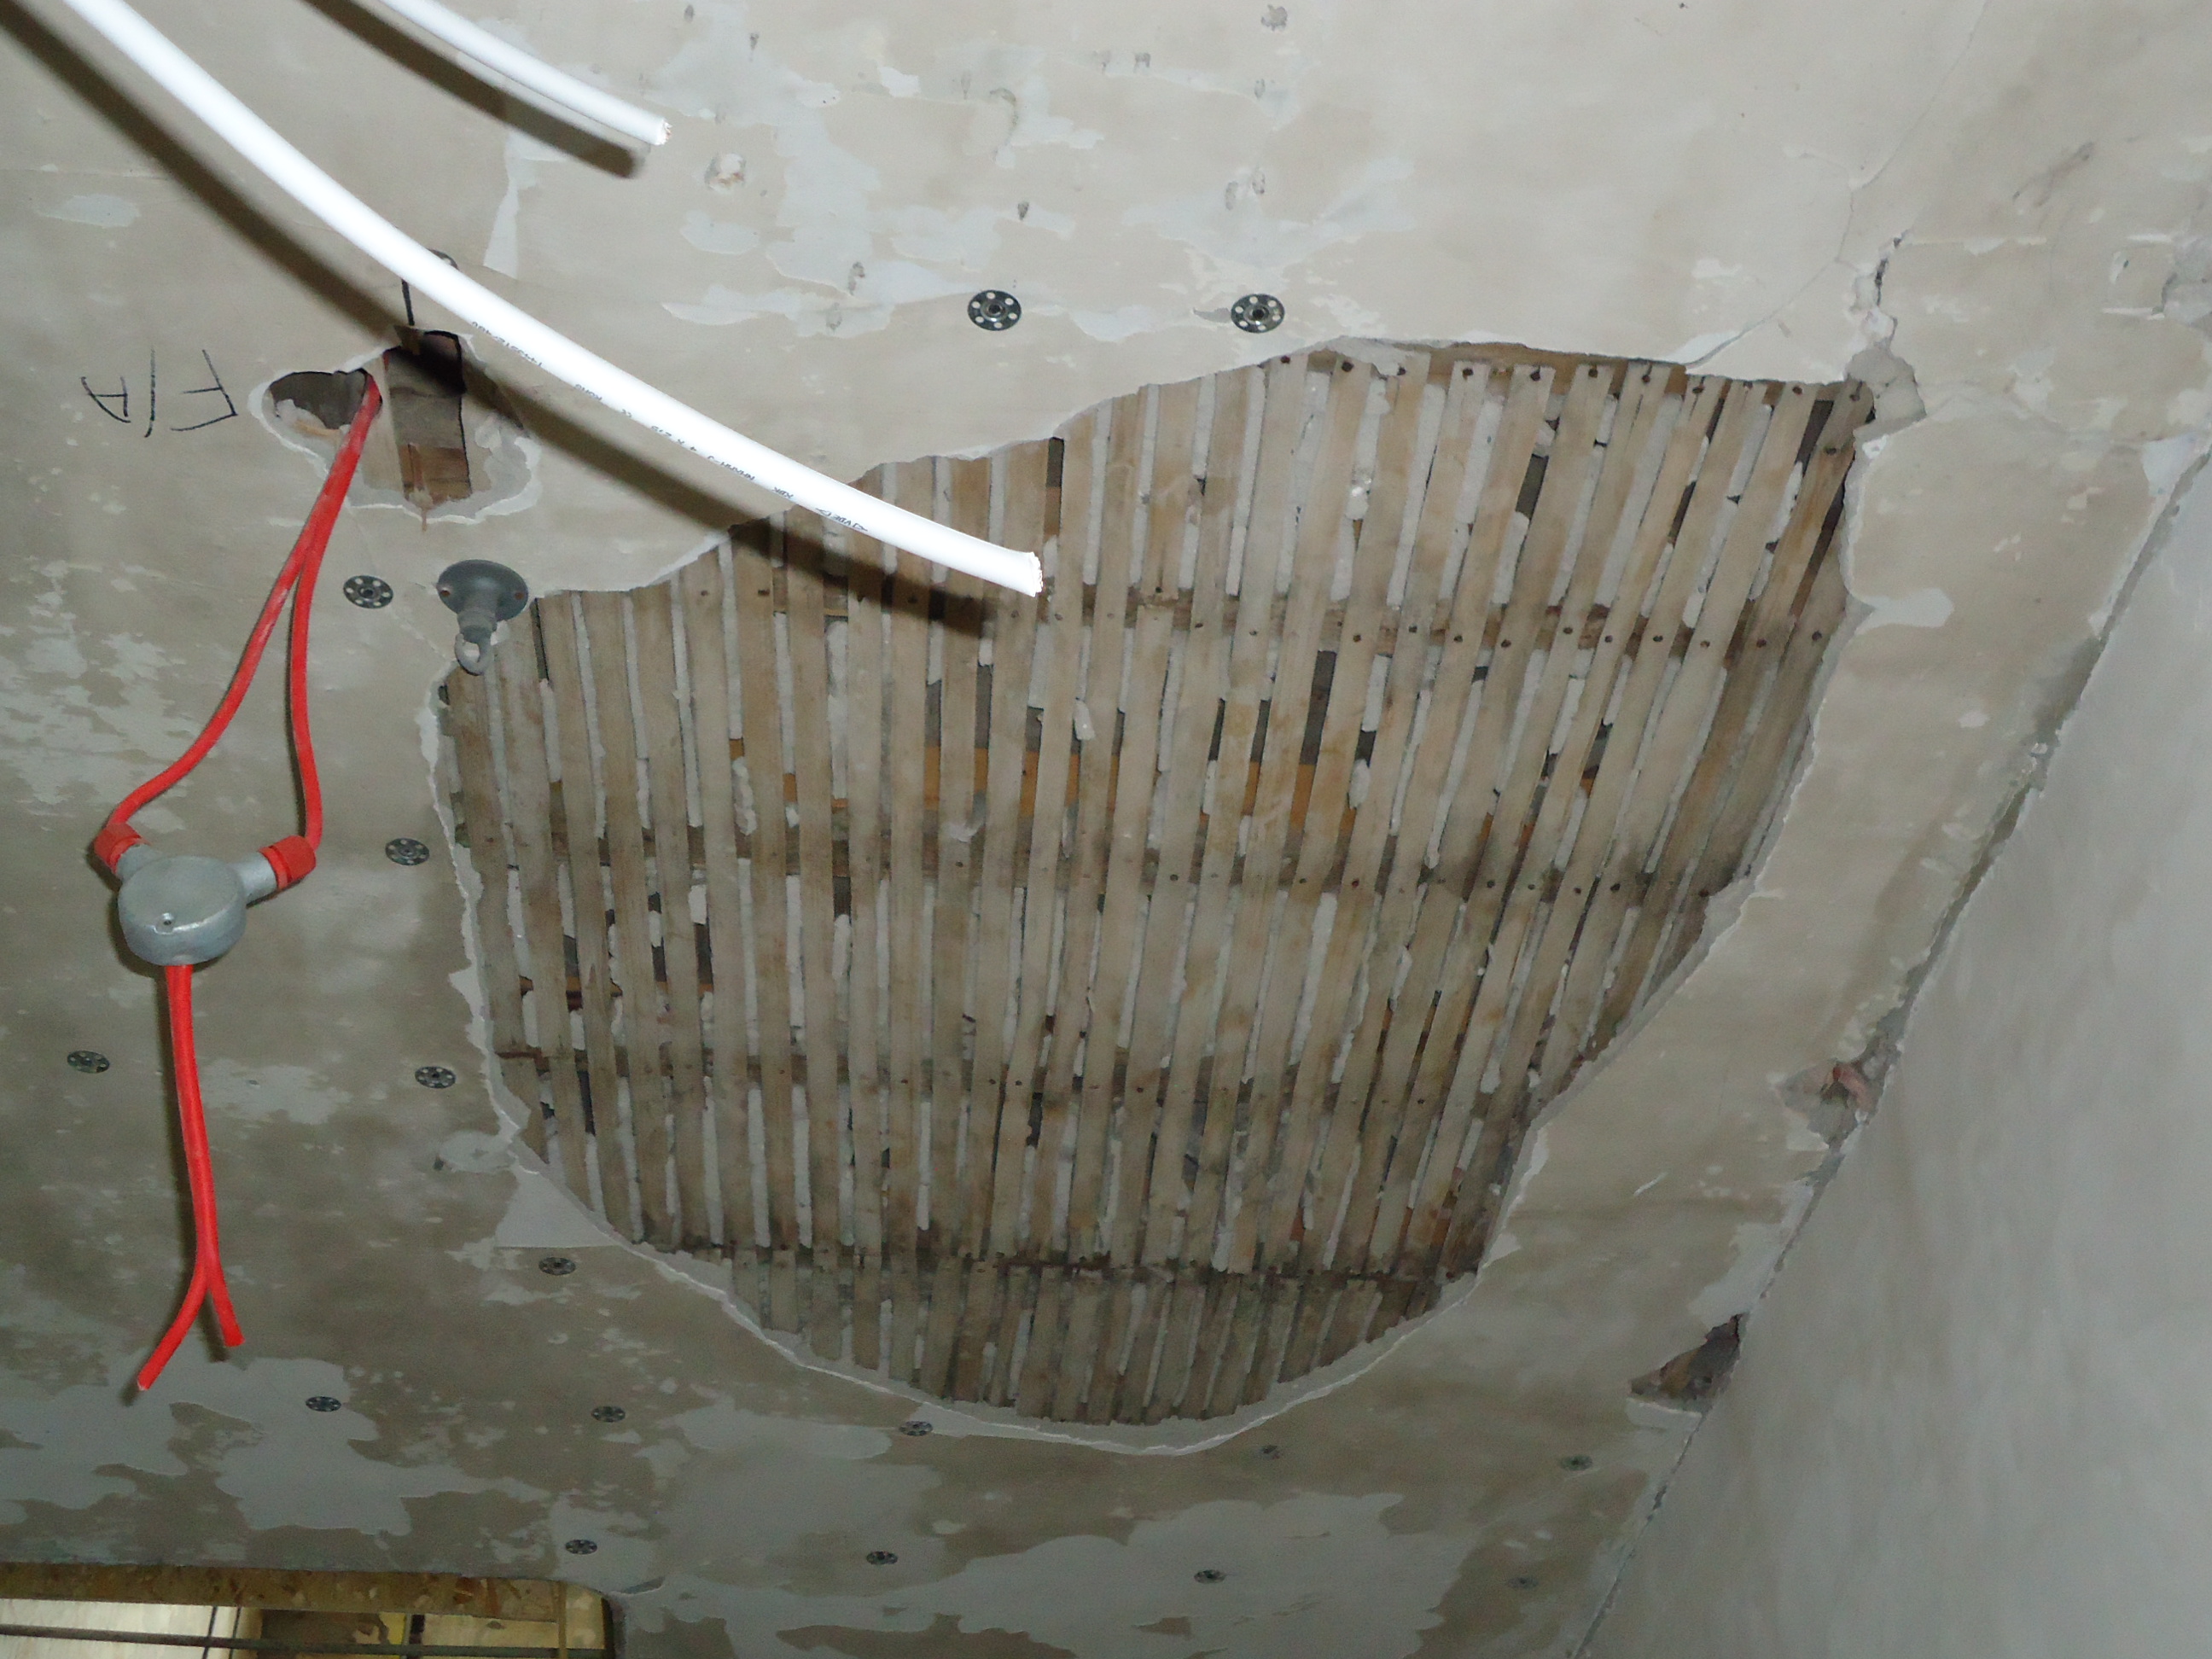 Lath and Plaster ceiling